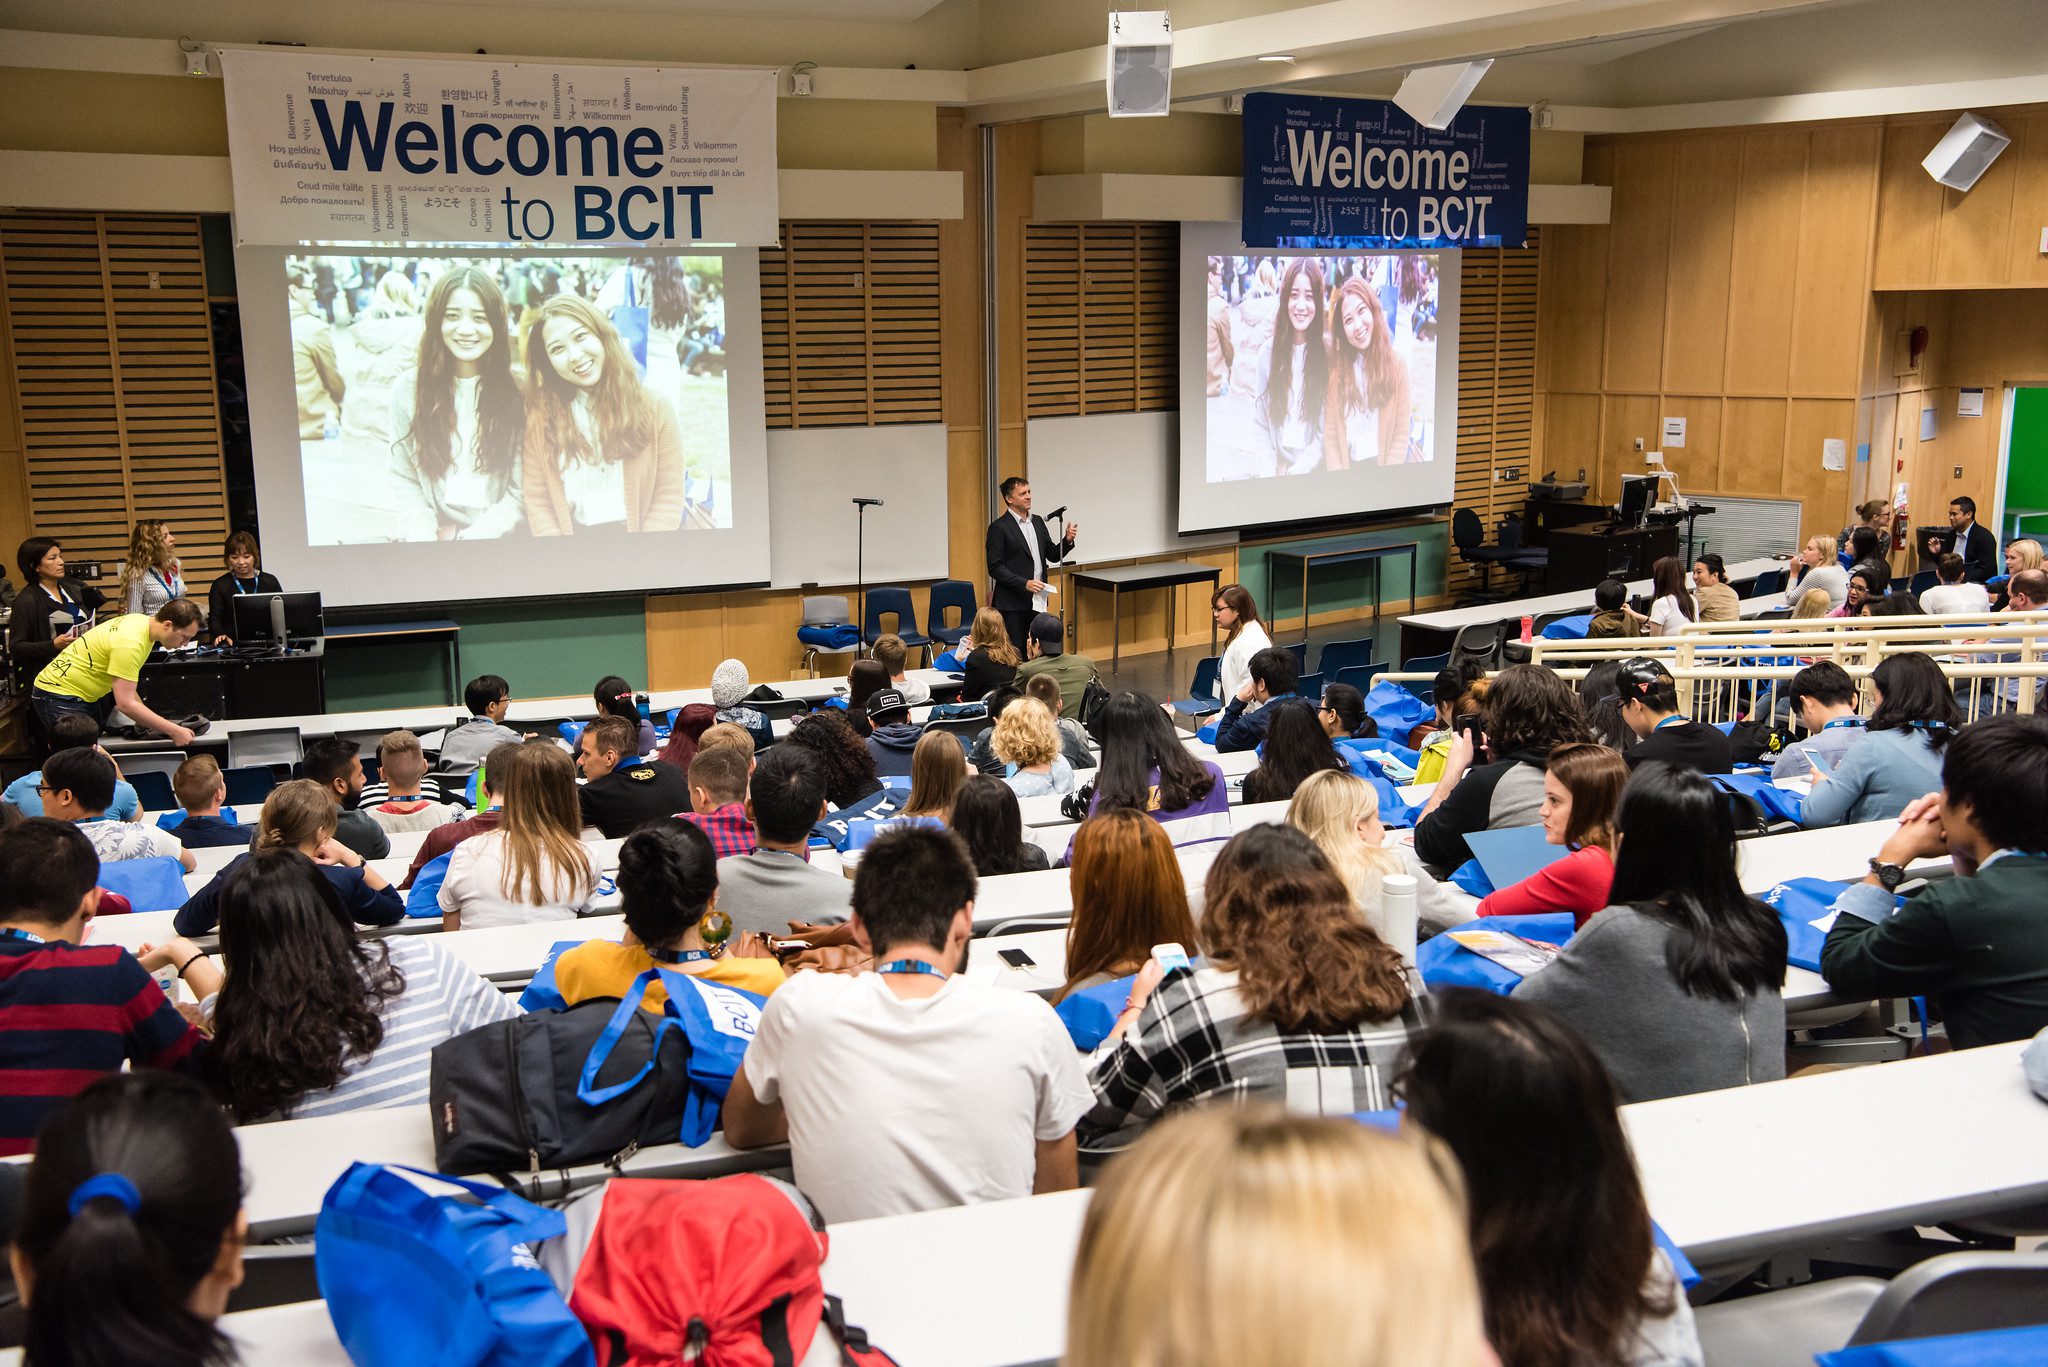 International Orientation event in lecture hall at BCIT